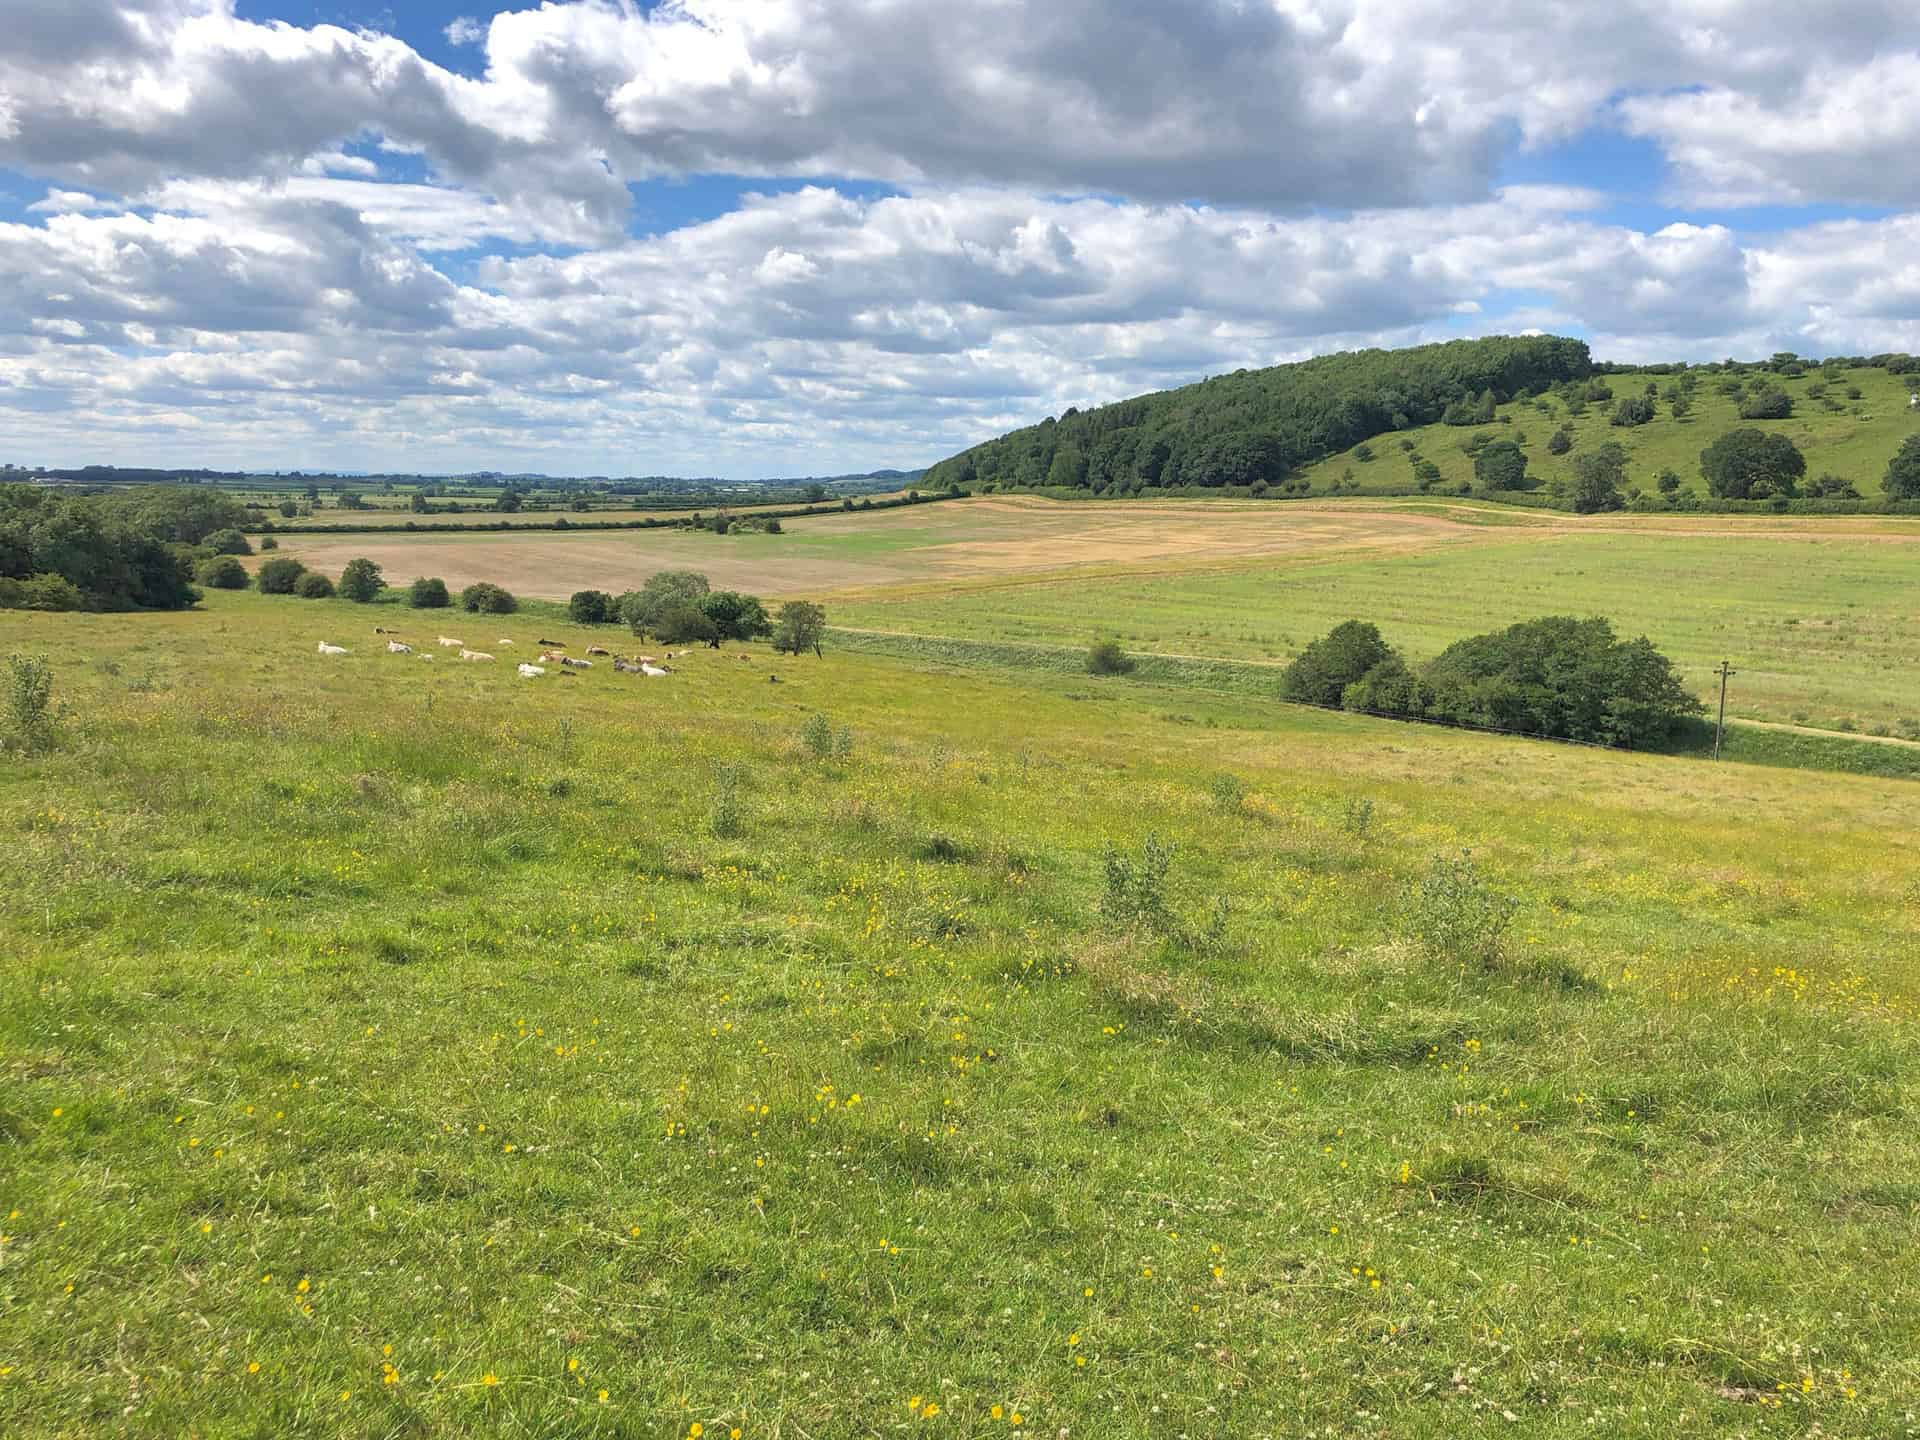 Beautiful countryside encountered during the Hovingham walk.